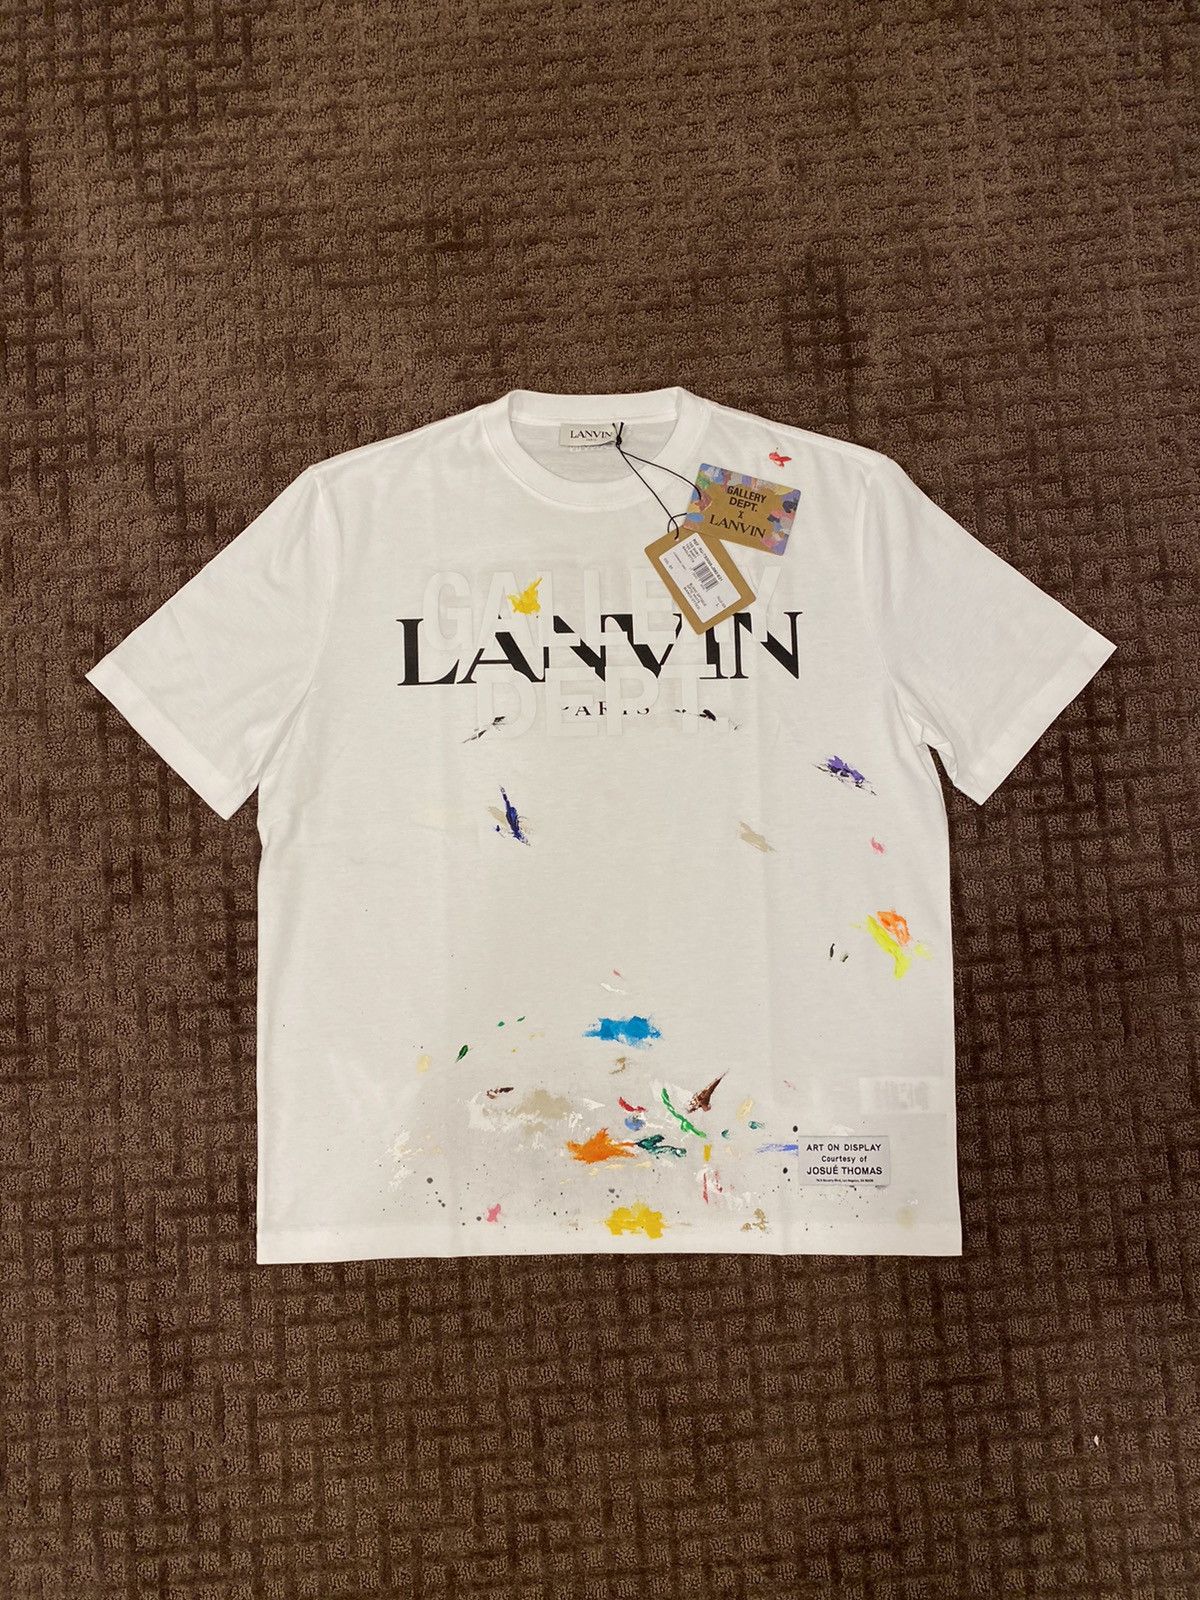 Lanvin Gallery Dept x Lanvin White Painted Short Sleeve Tee | Grailed